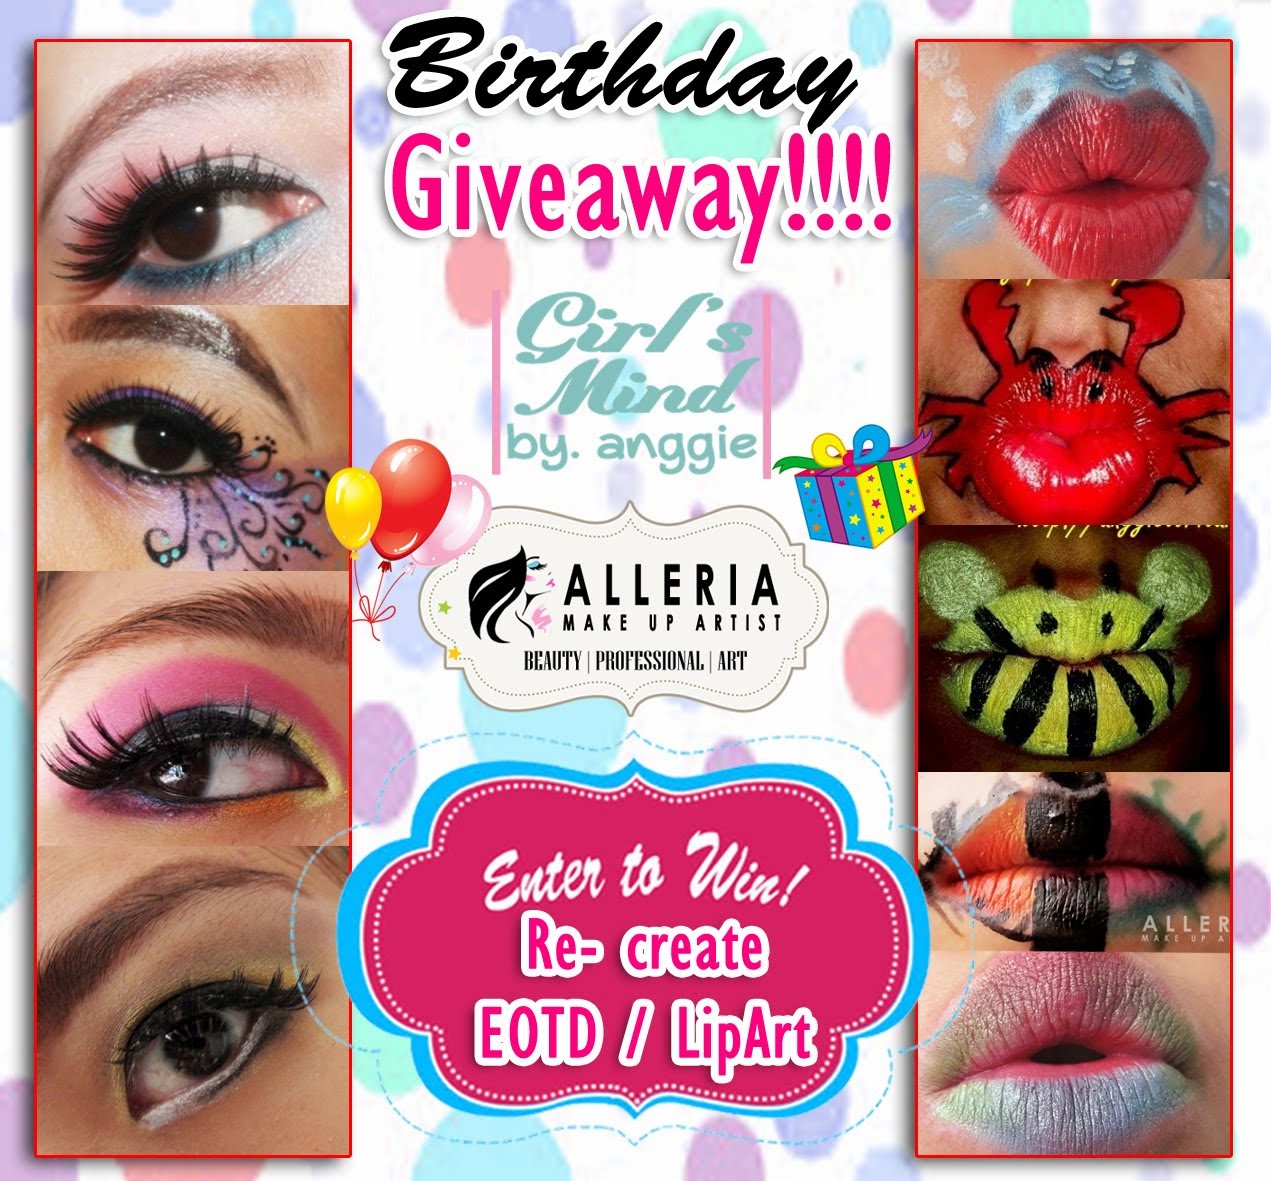 My 1st Birthday Giveaway